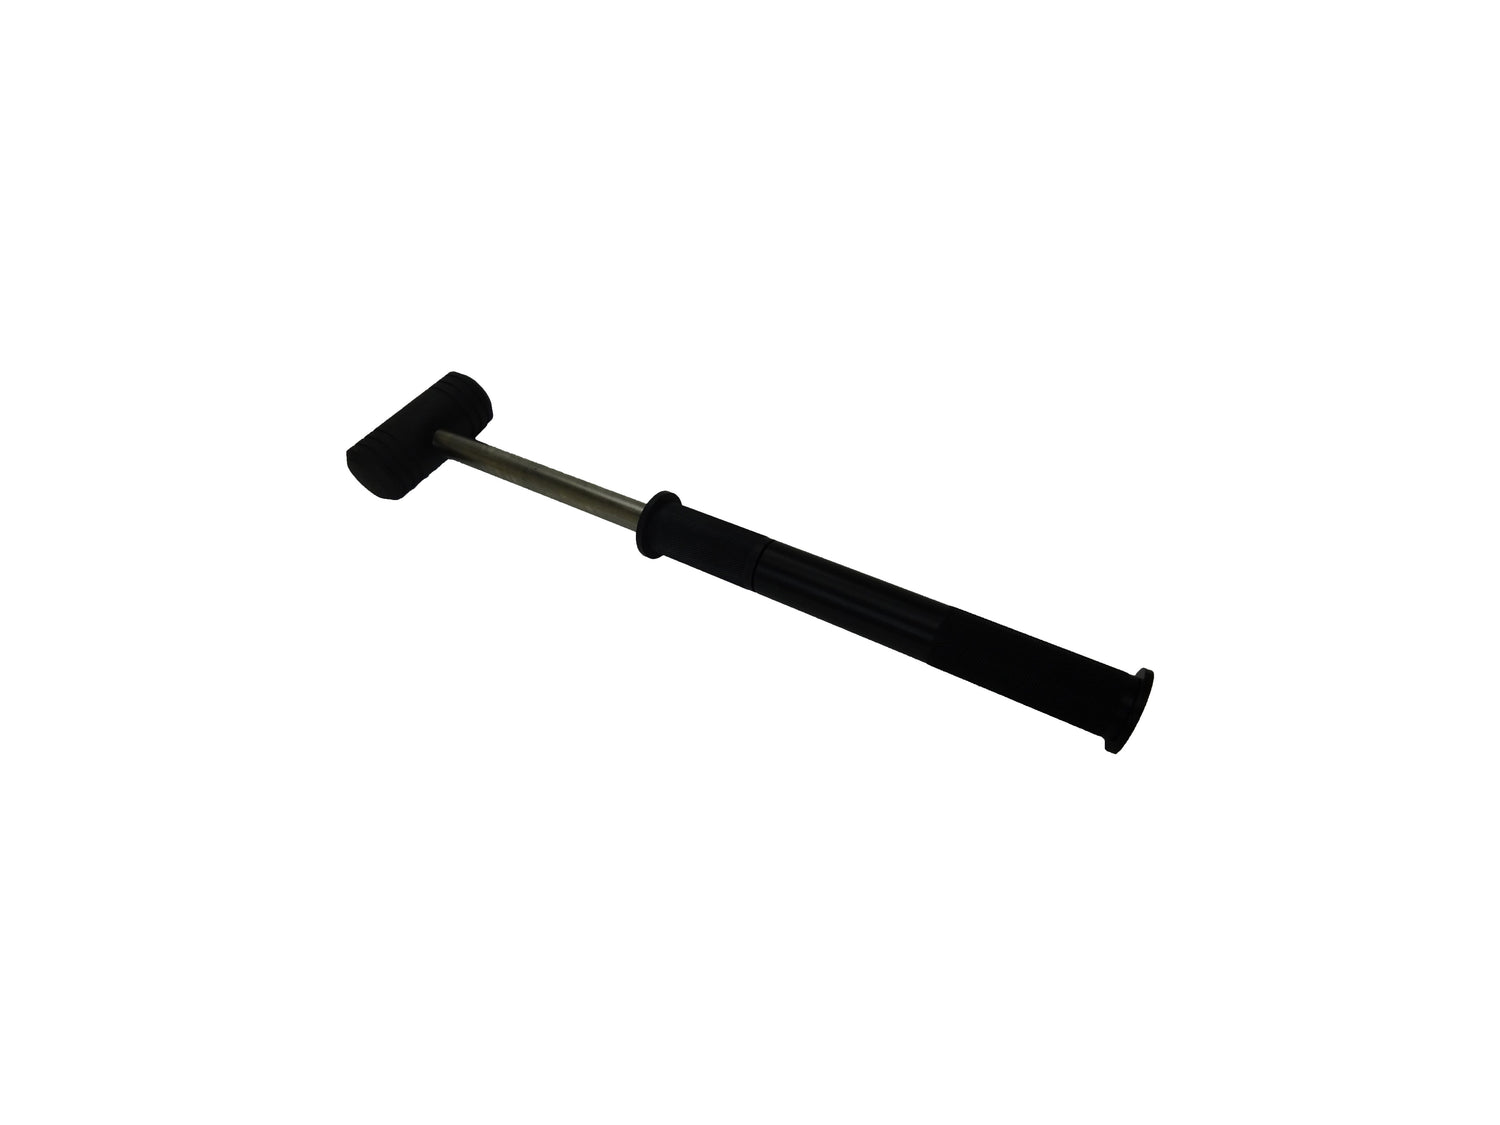 Bushido Tactical Collapsible Breaching Tool Sledge Hammer